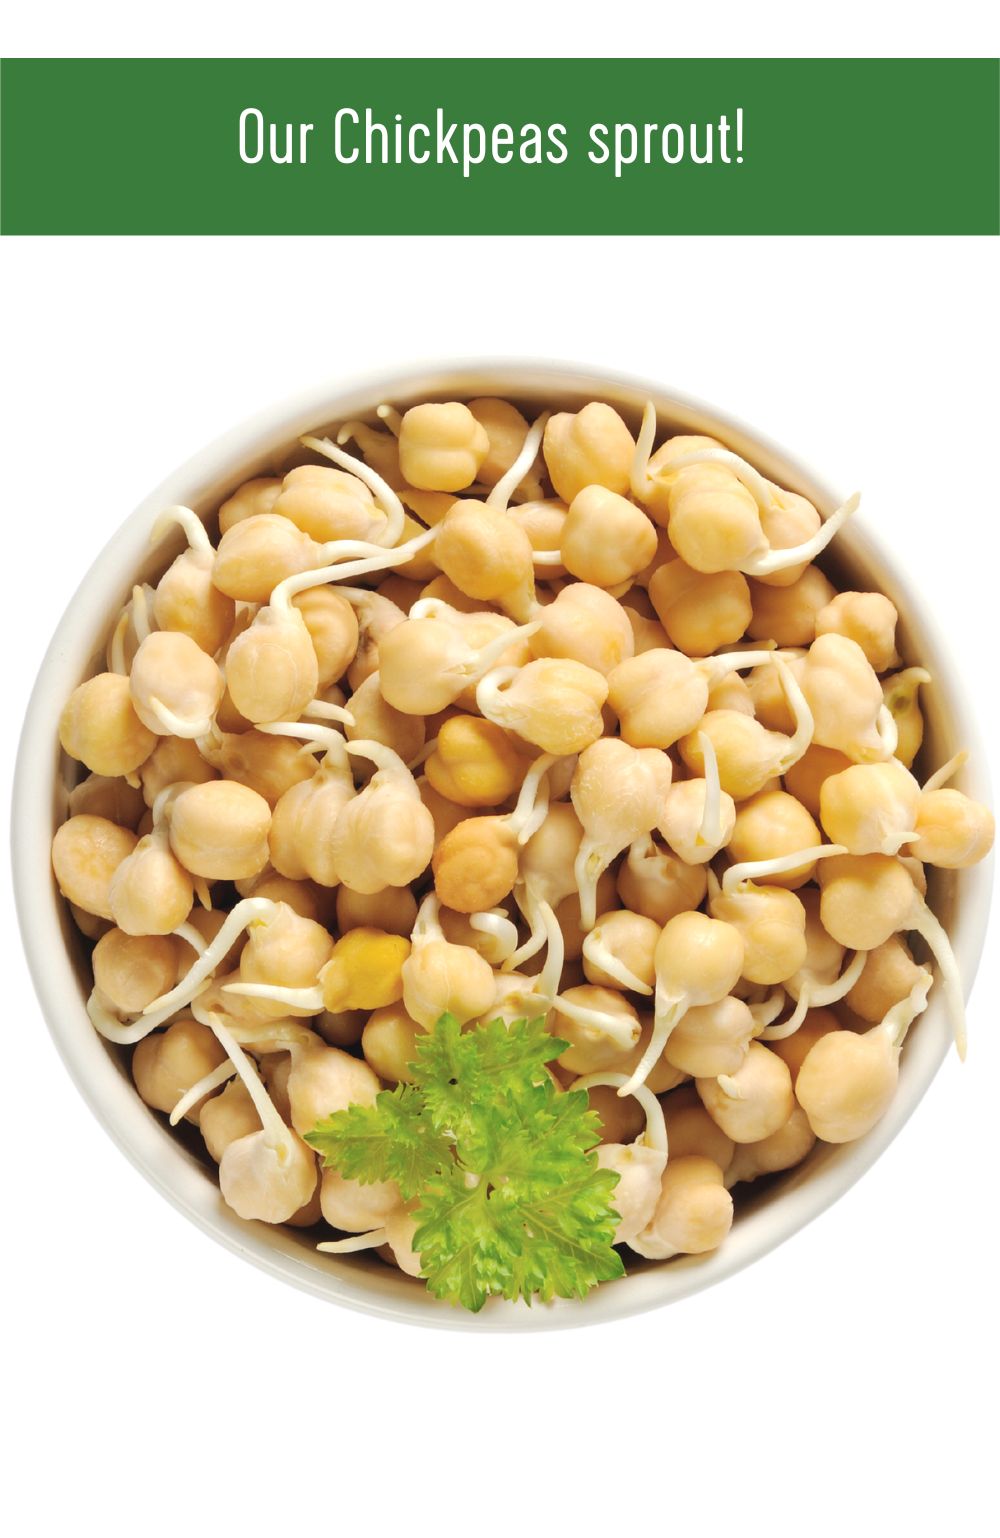 How to Sprout Washington State Grown Chickpeas